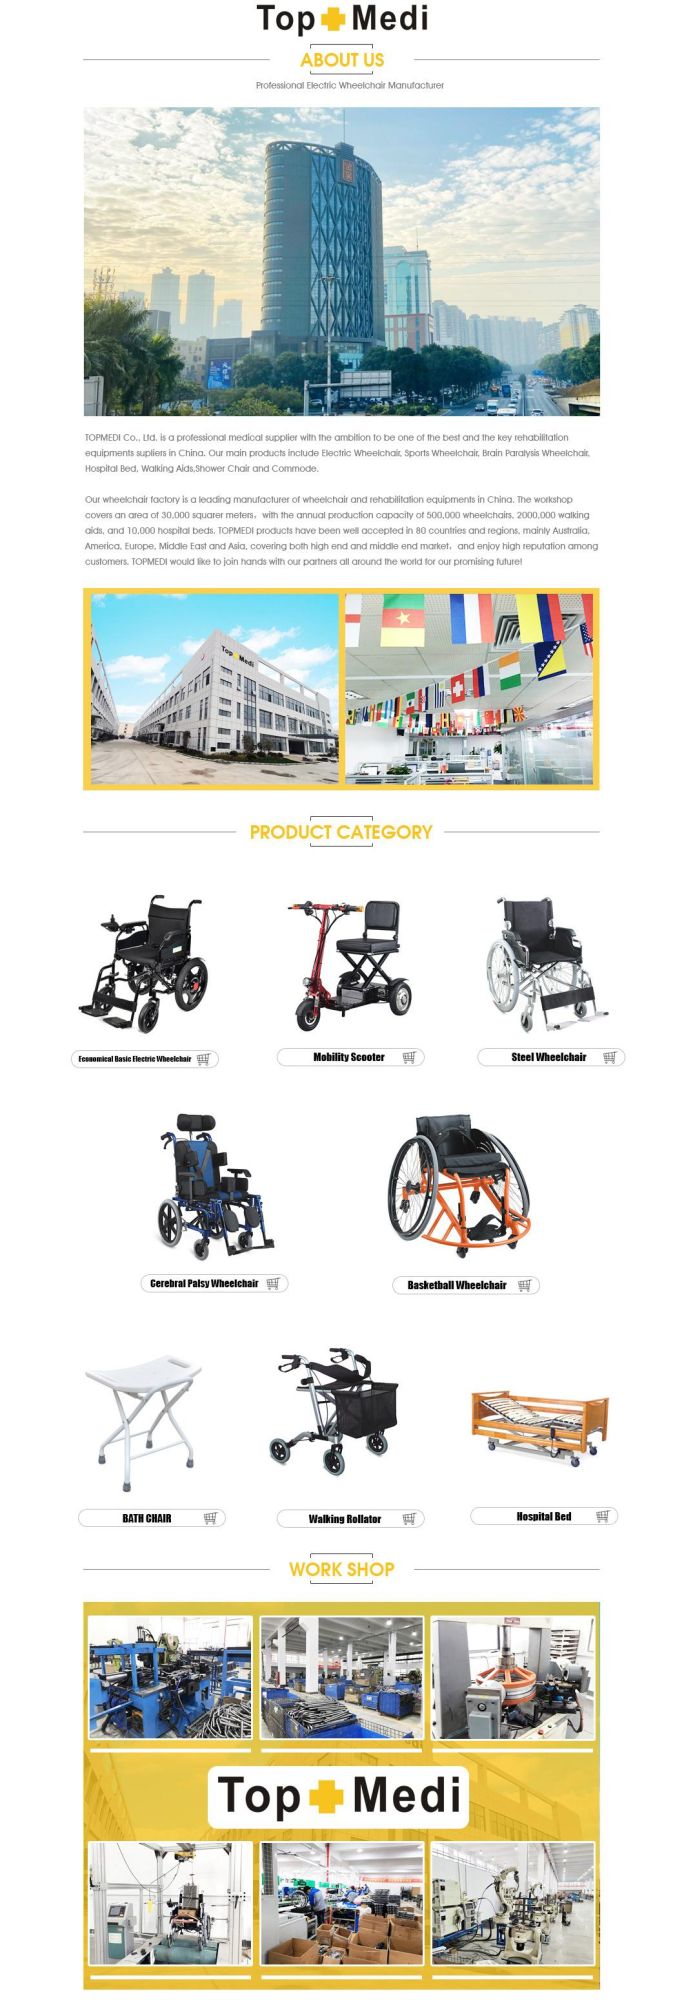 2022 Rehabilitation Therapy Supplies Topmedi High Back Reclining Wheelchairs for Cerebral Palsy Children